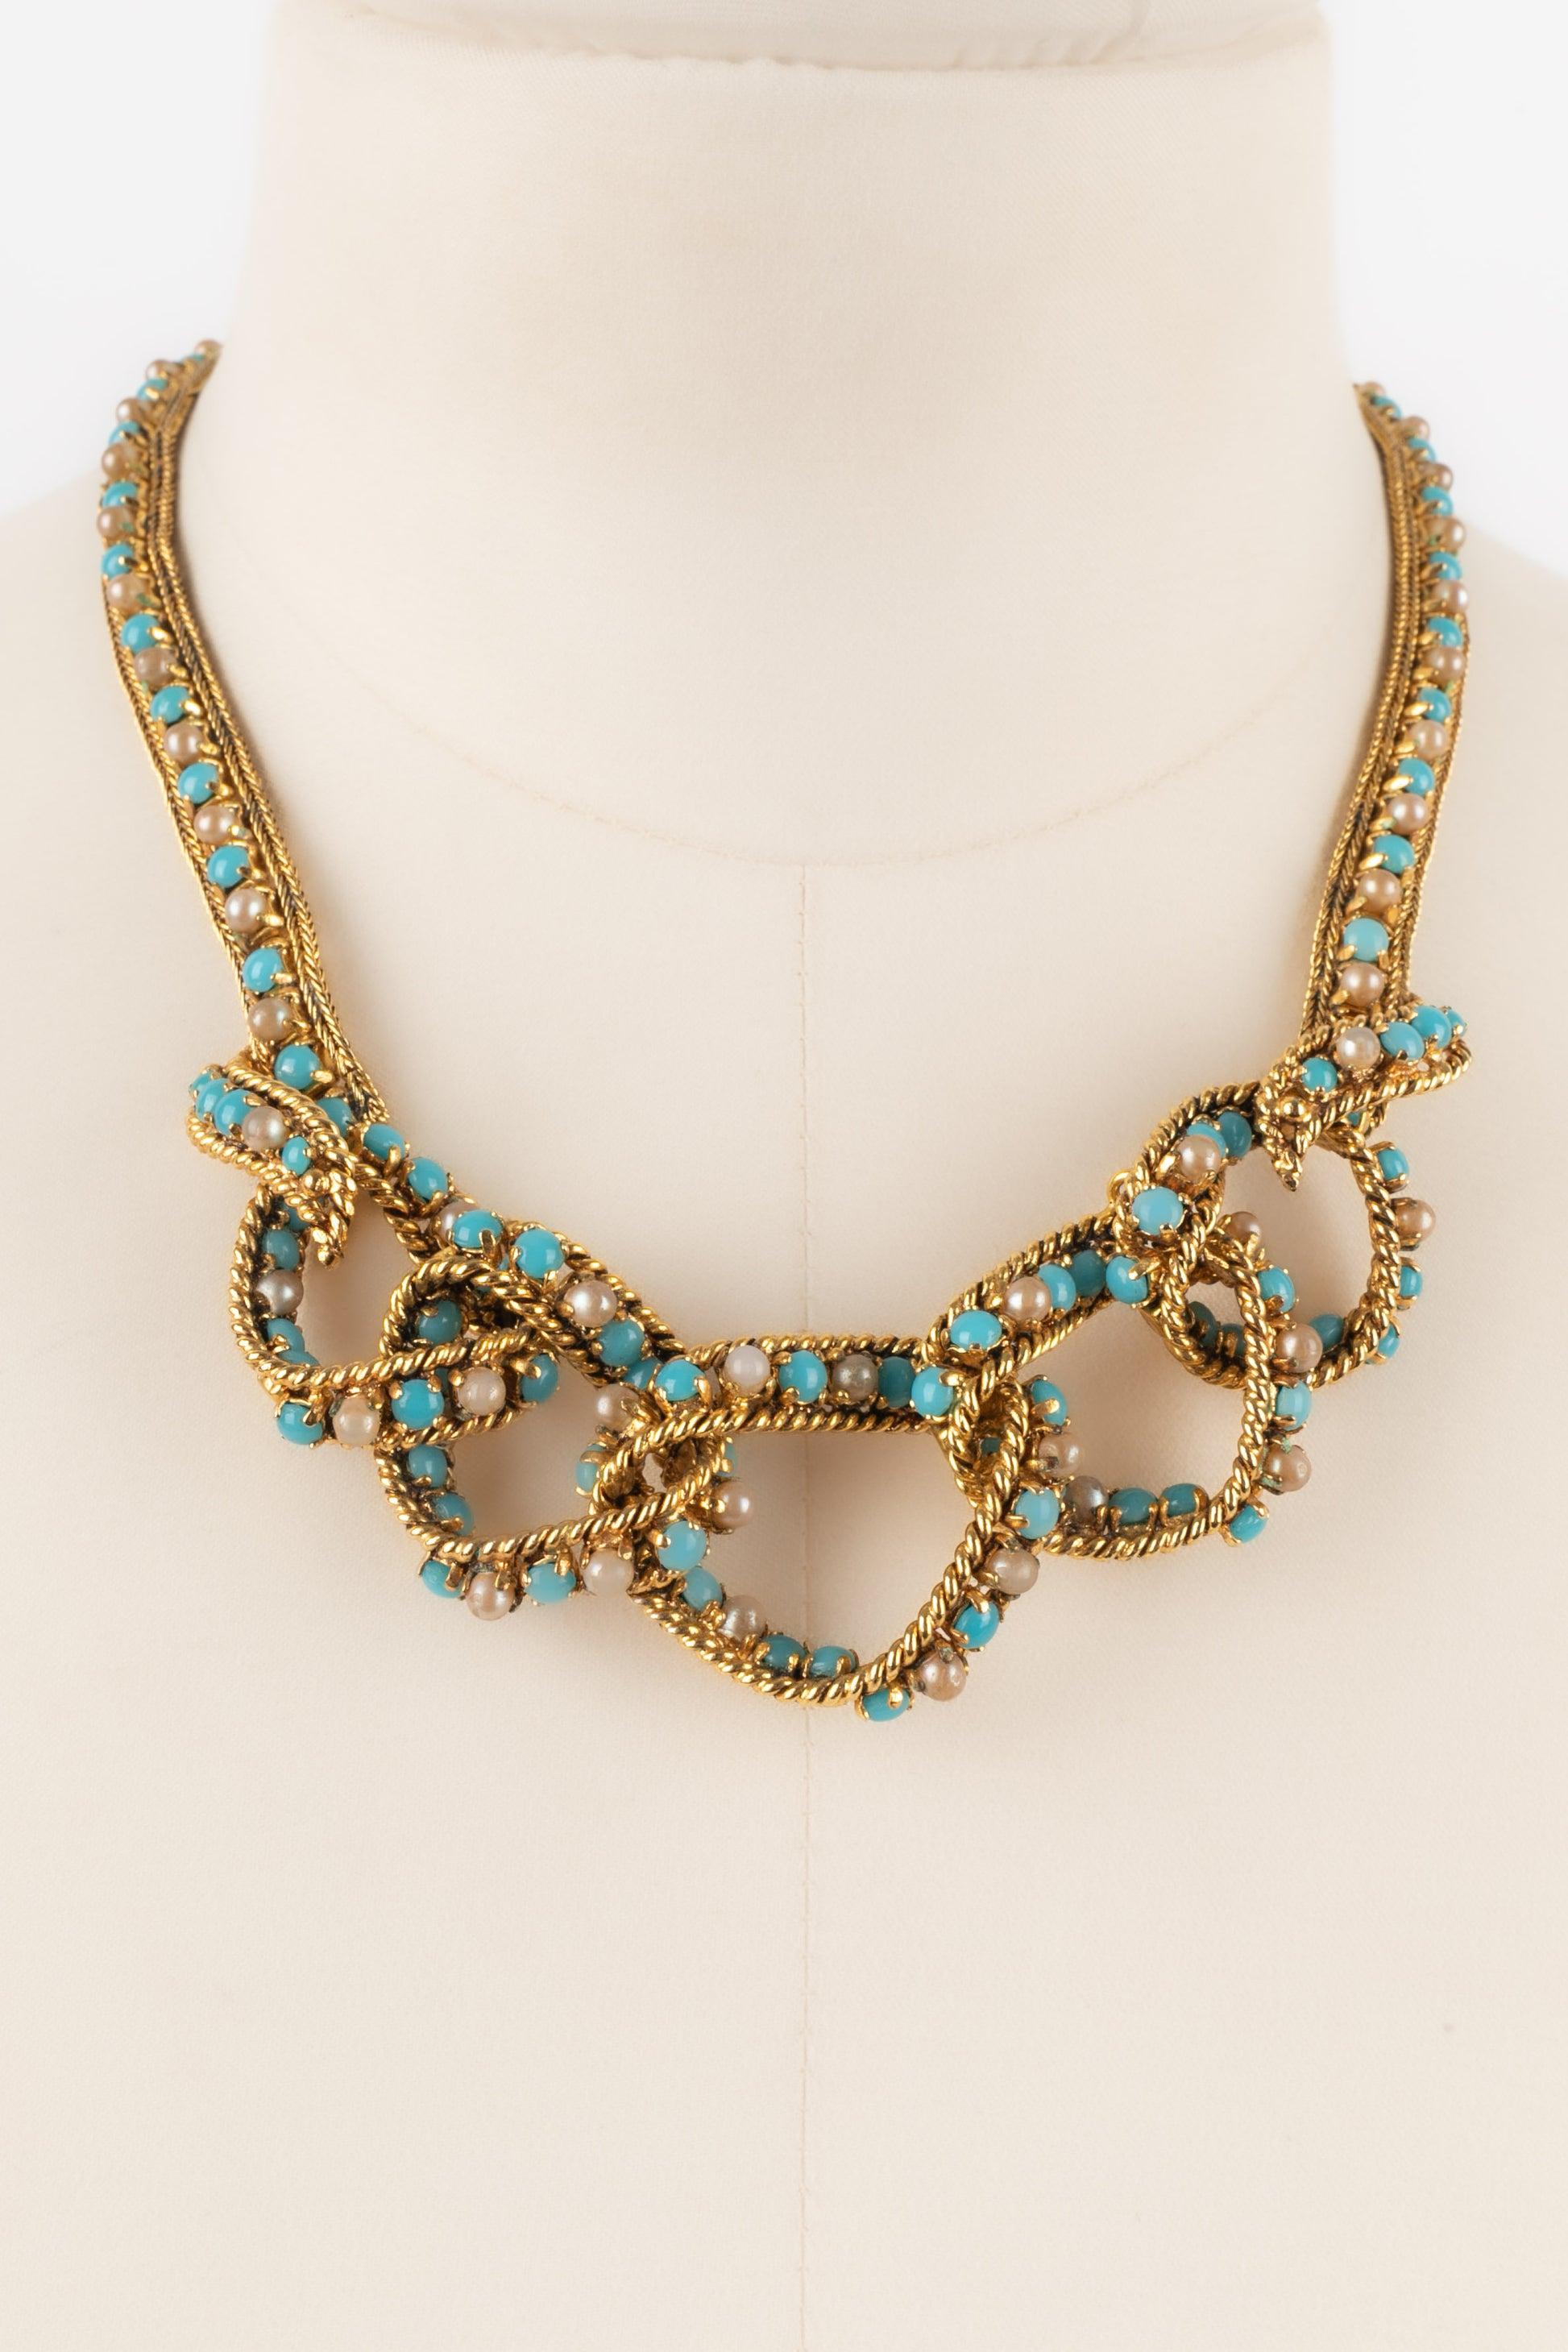 Dior Golden Metal Necklace with Costume Pearly Cabochons, 1965 5